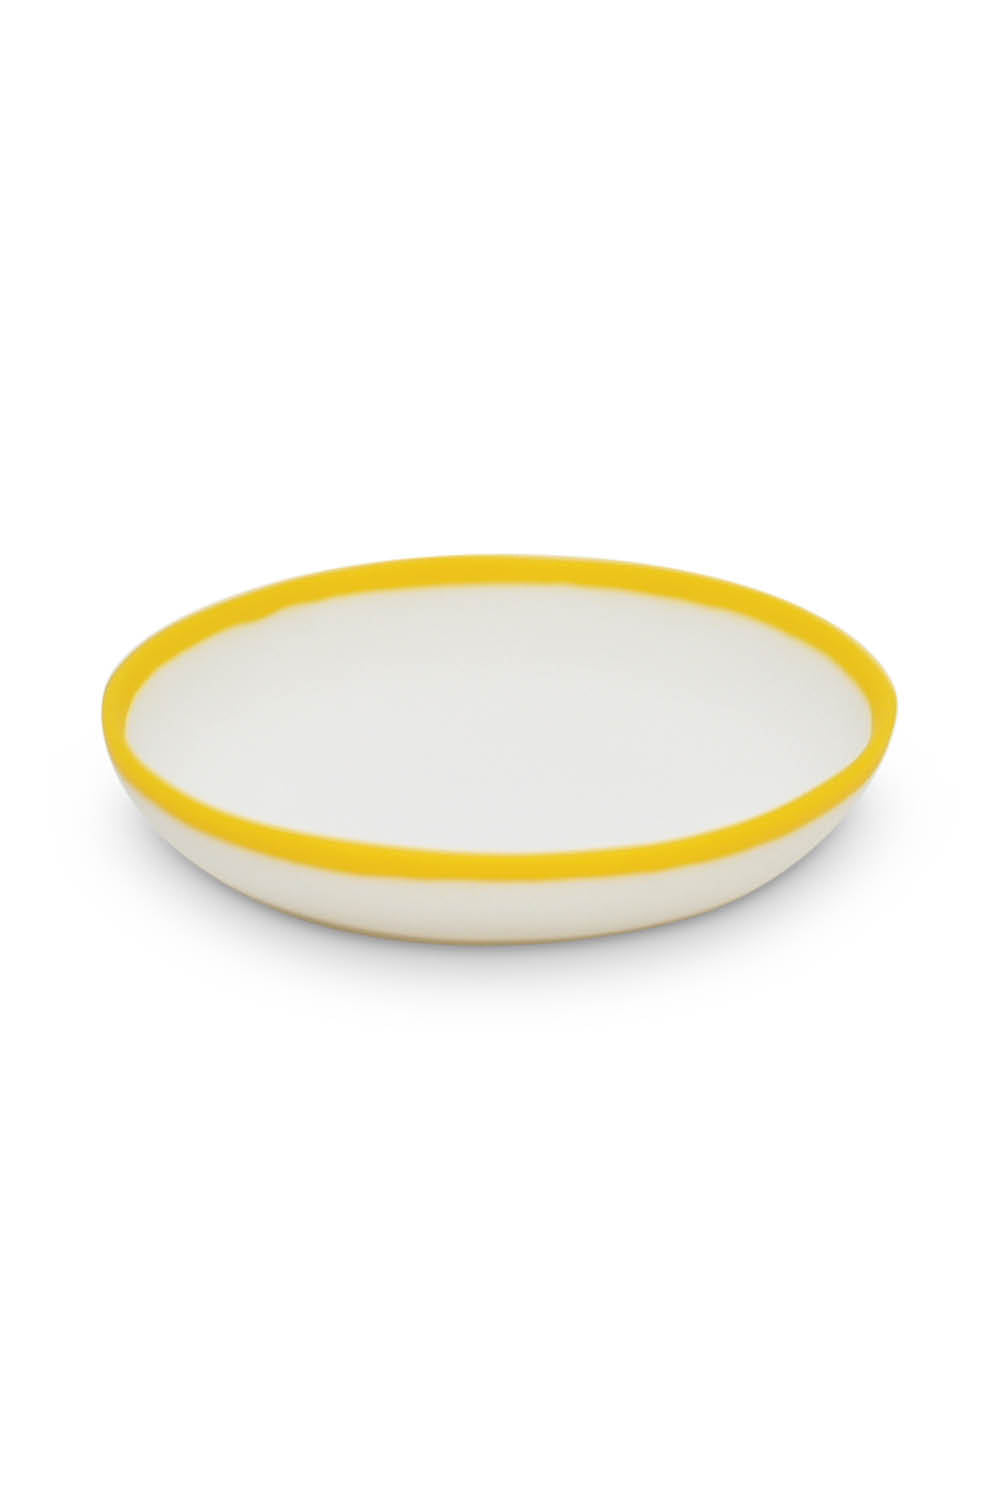 LIGNE Small Plate in White With Sunshine Yellow Rim